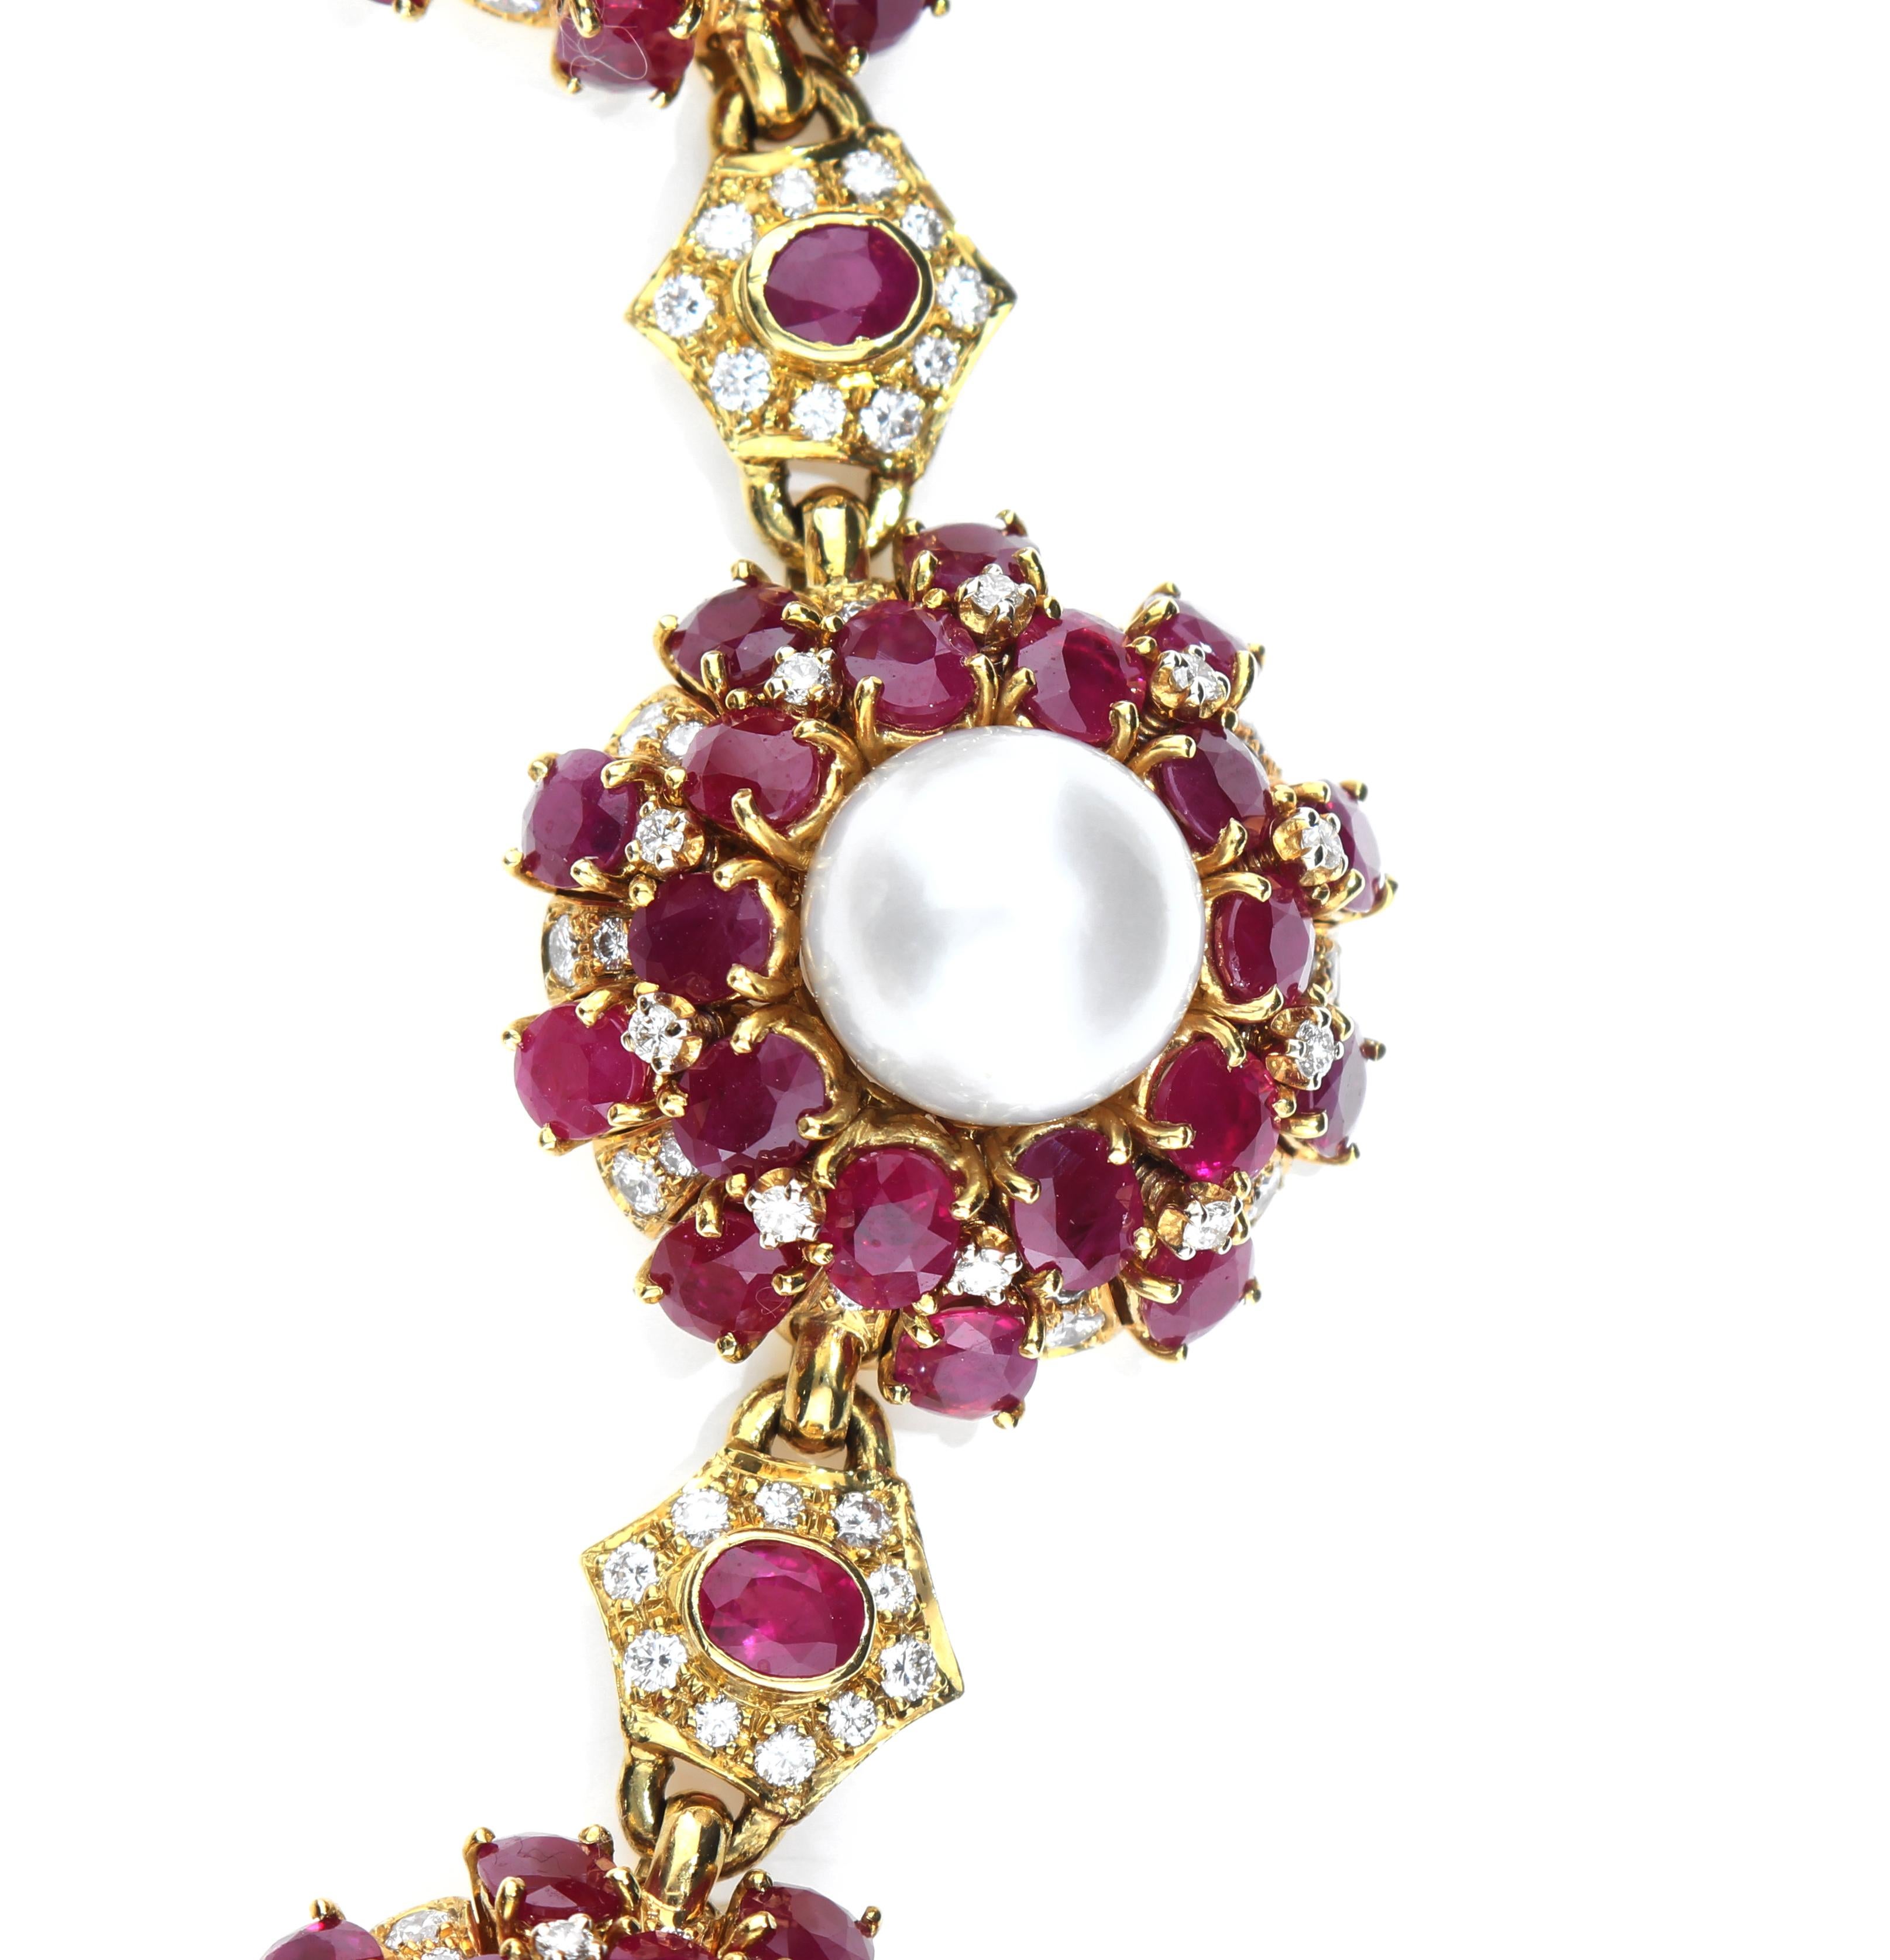 Necklace with Rubies, Pearls and Diamonds in 18 Karat Yellow Gold 1